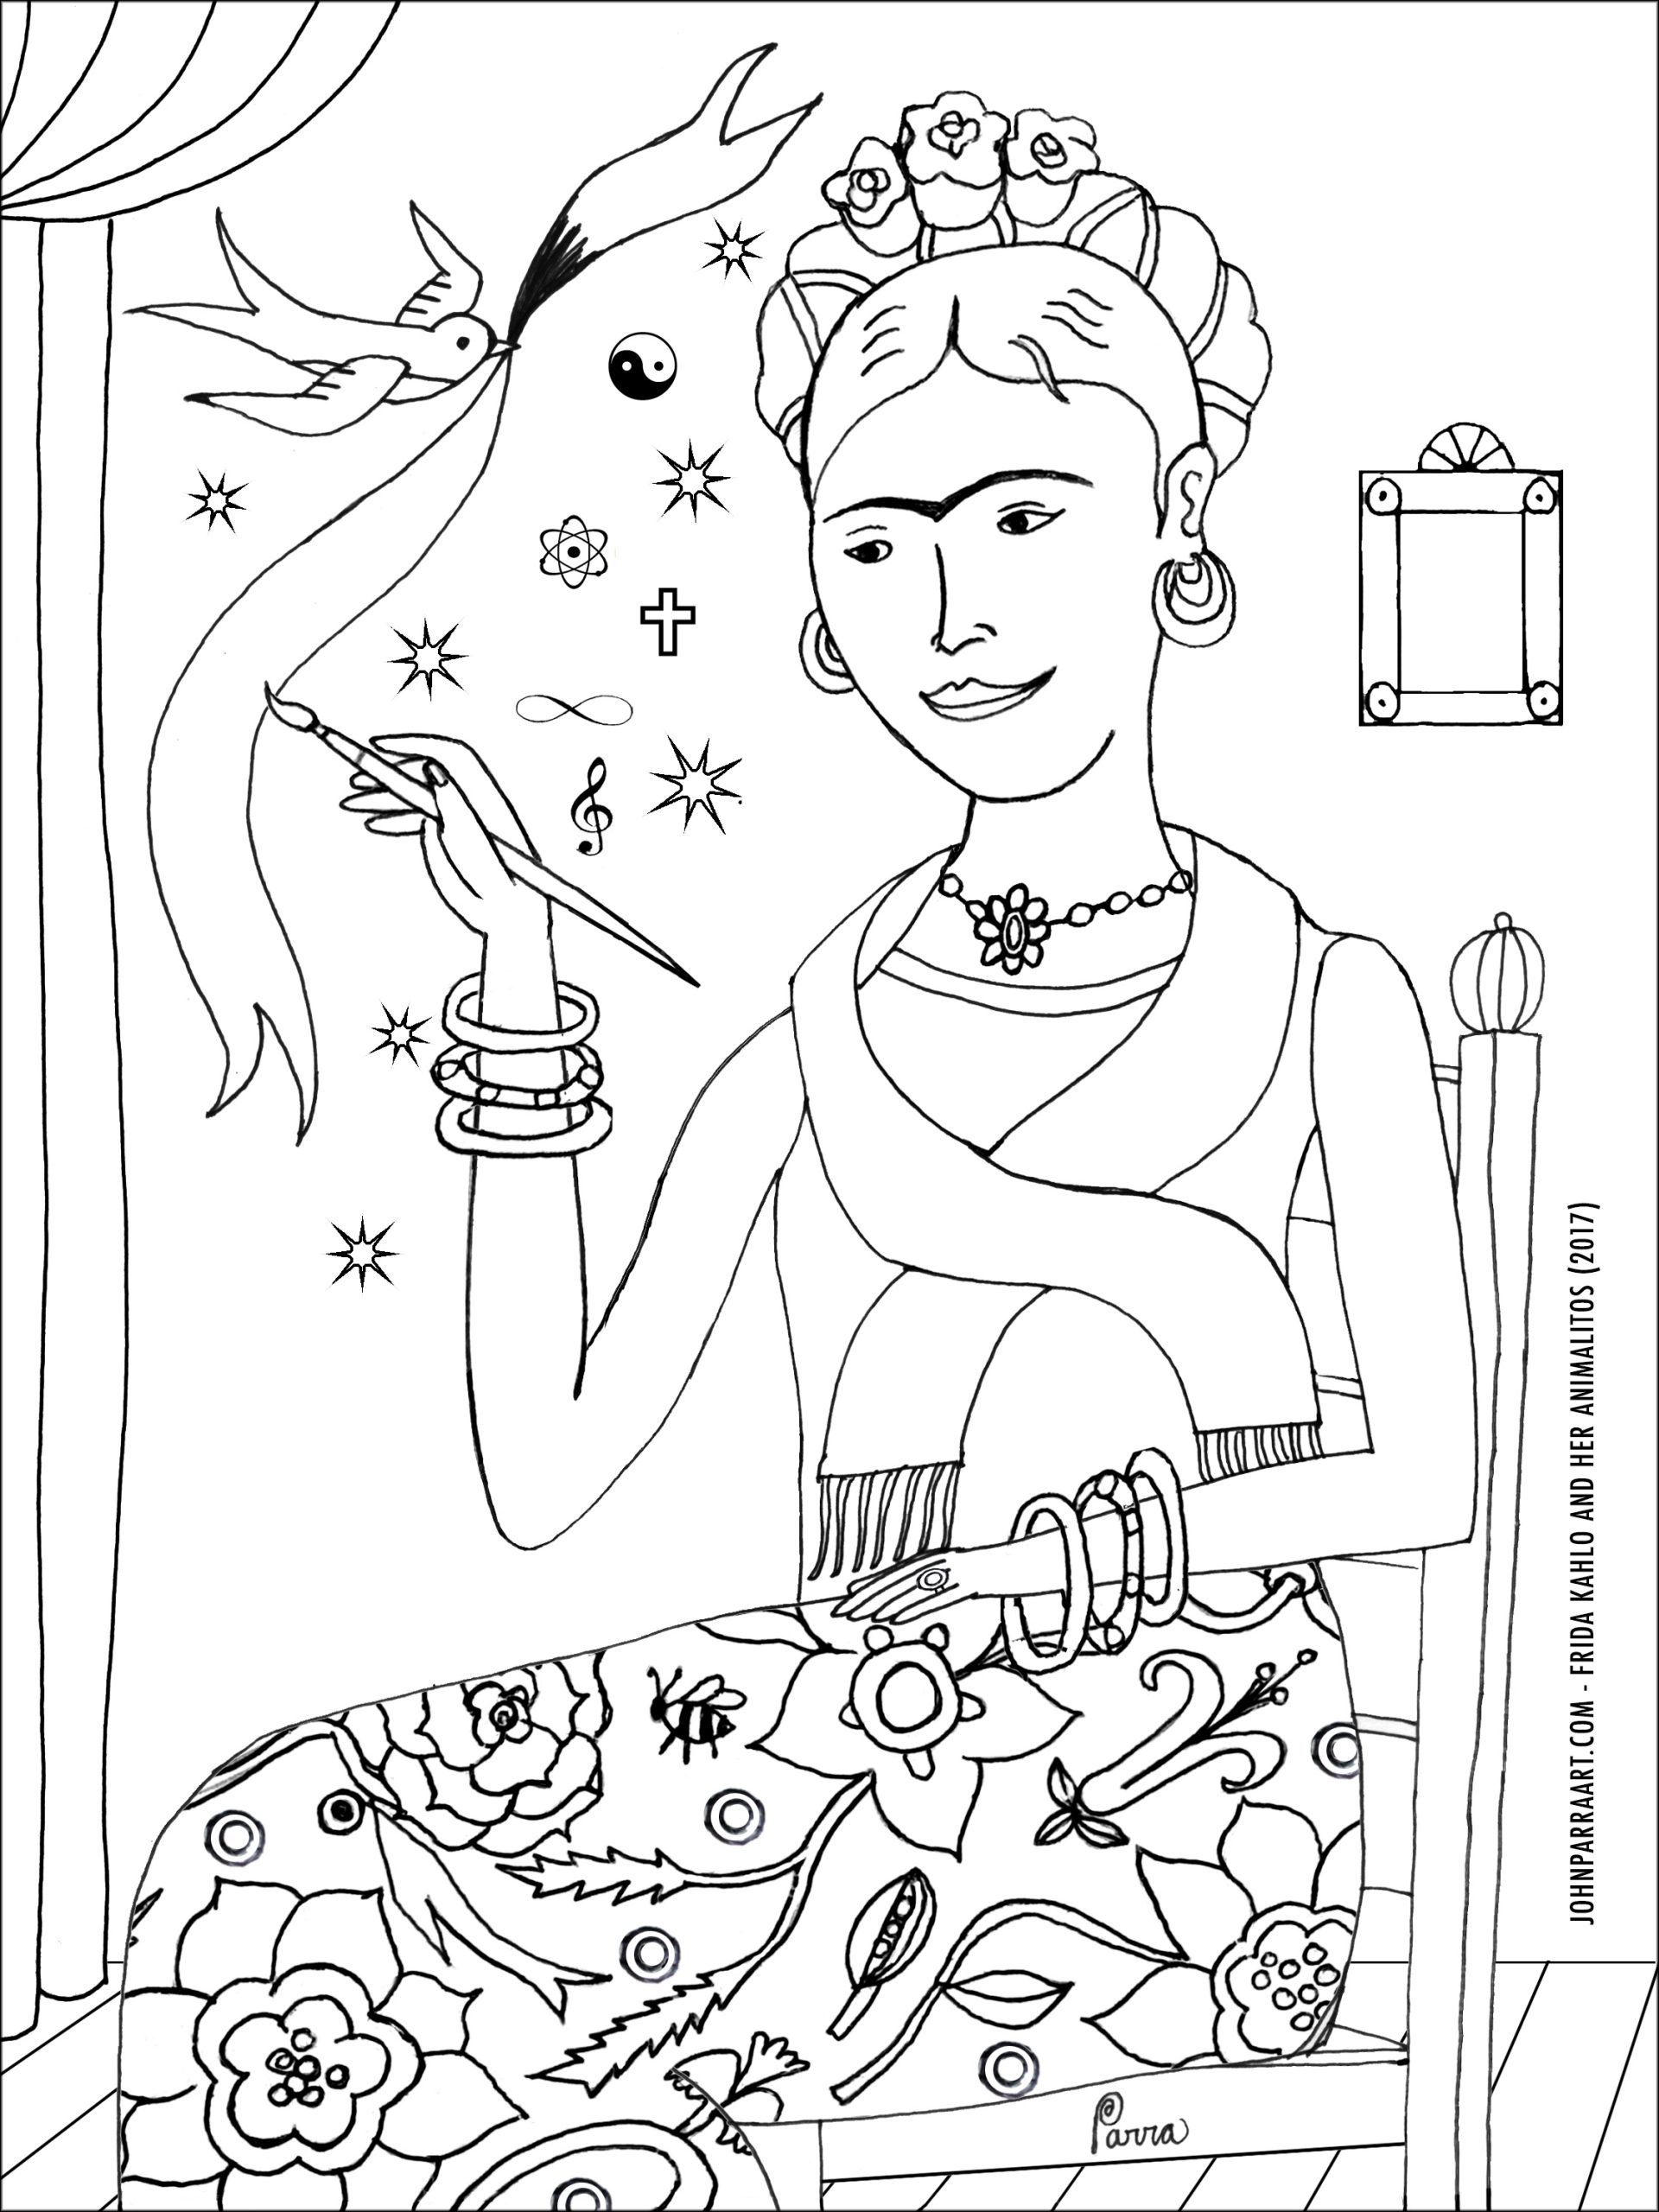 Coloring Pages - Society of Illustrators